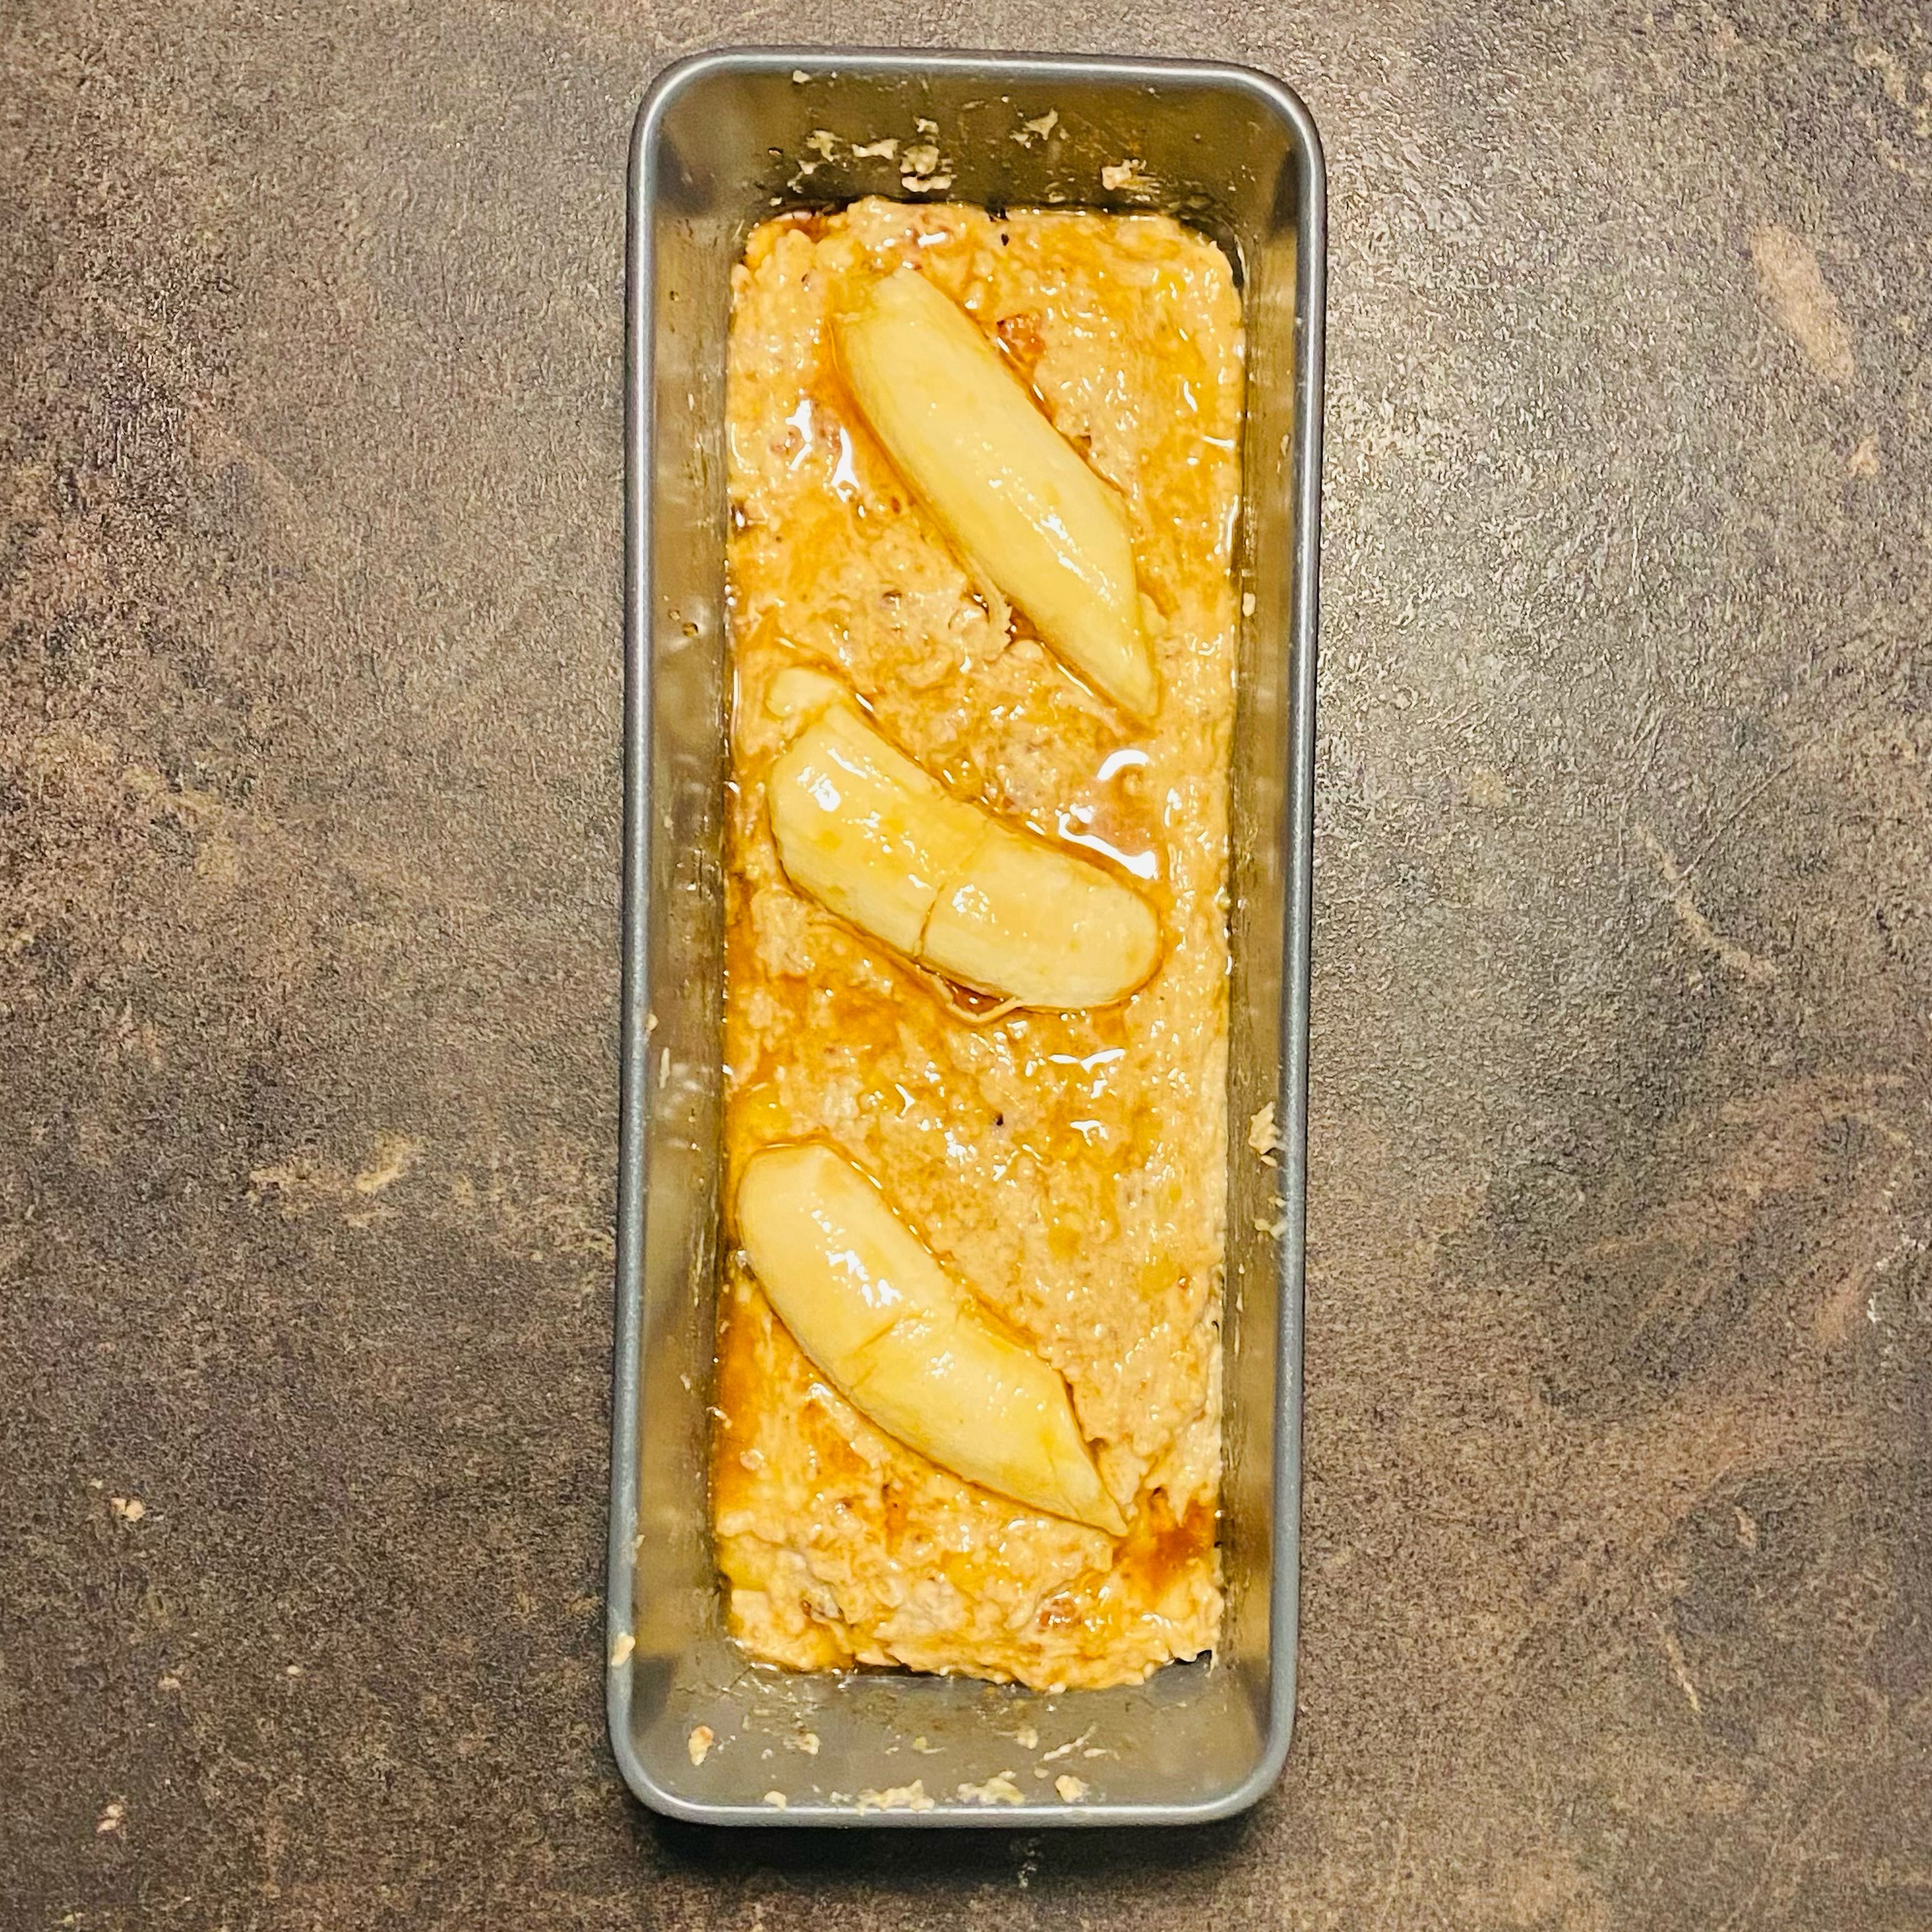 Cut the remaining banana lenghtwise and then in half. Then place on top of the dough with light pressure. Bake the bananabread for 45 minutes at 170 degrees celcius.